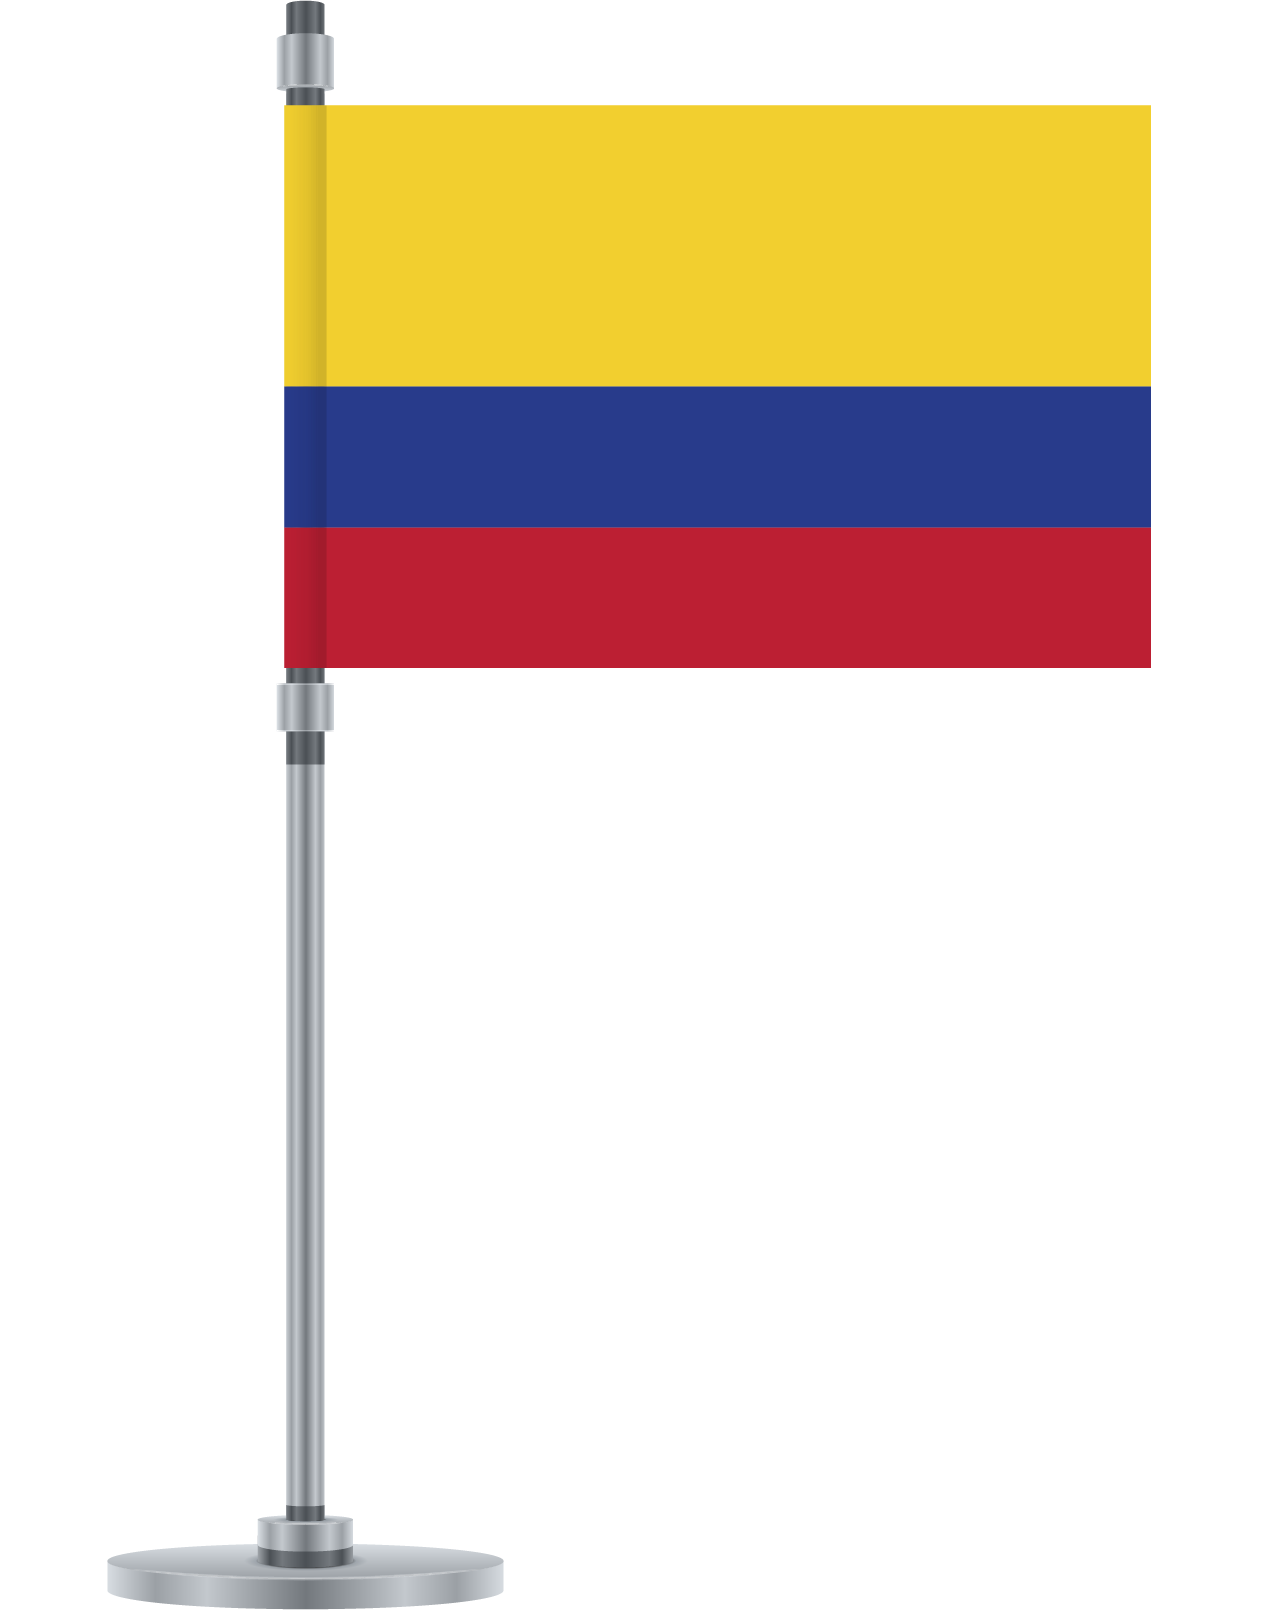 Colombia flag